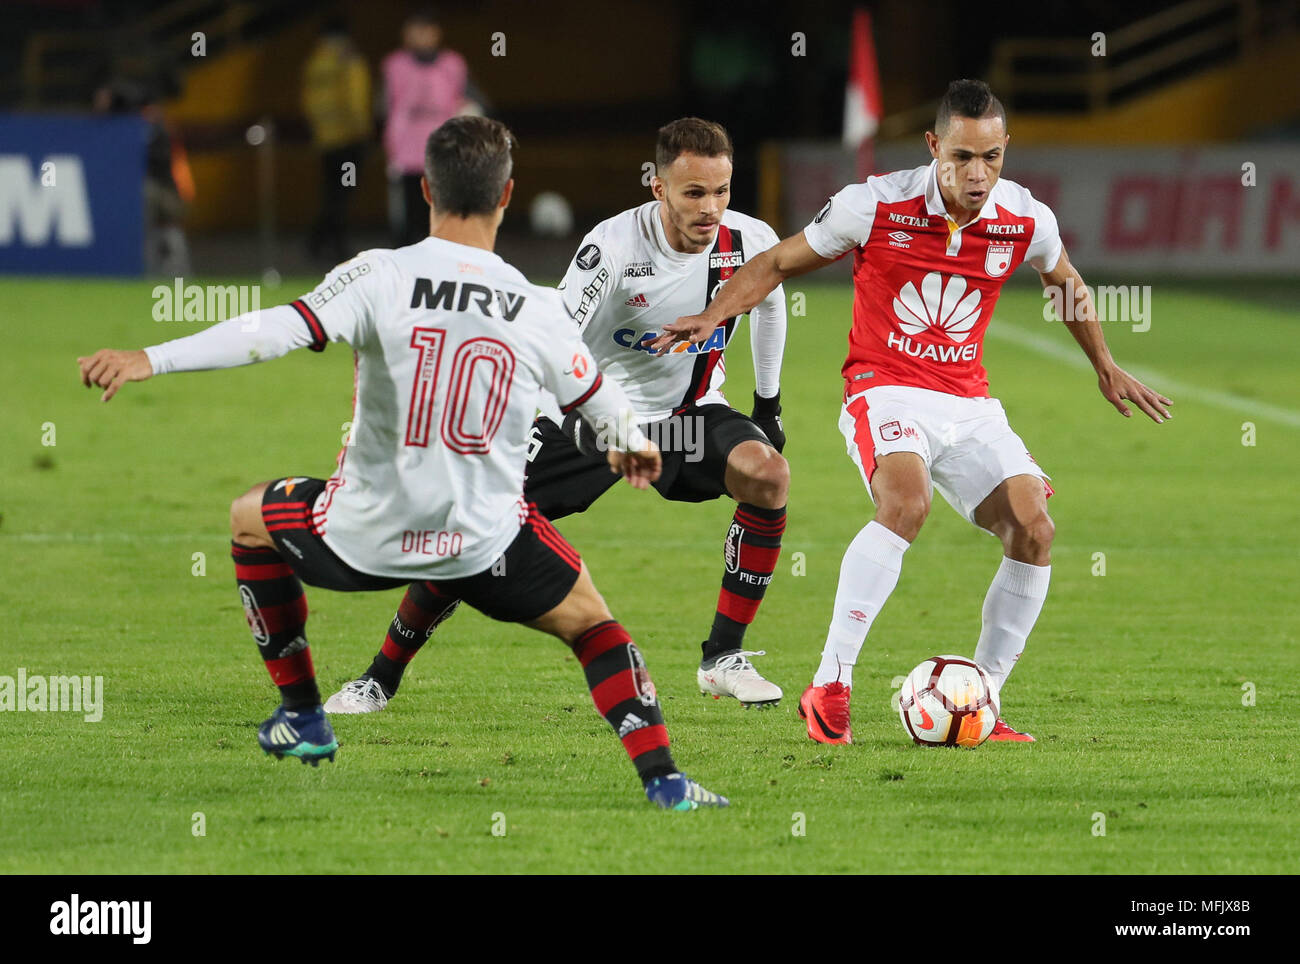 Independiente Santa Fe S Armando Vargas R Vies For The Ball With Flamengo S Rene C And Diego L During The Copa Libertadores Soccer Match Between Independiente Santa Fe Of Colombia And Flamengo Of